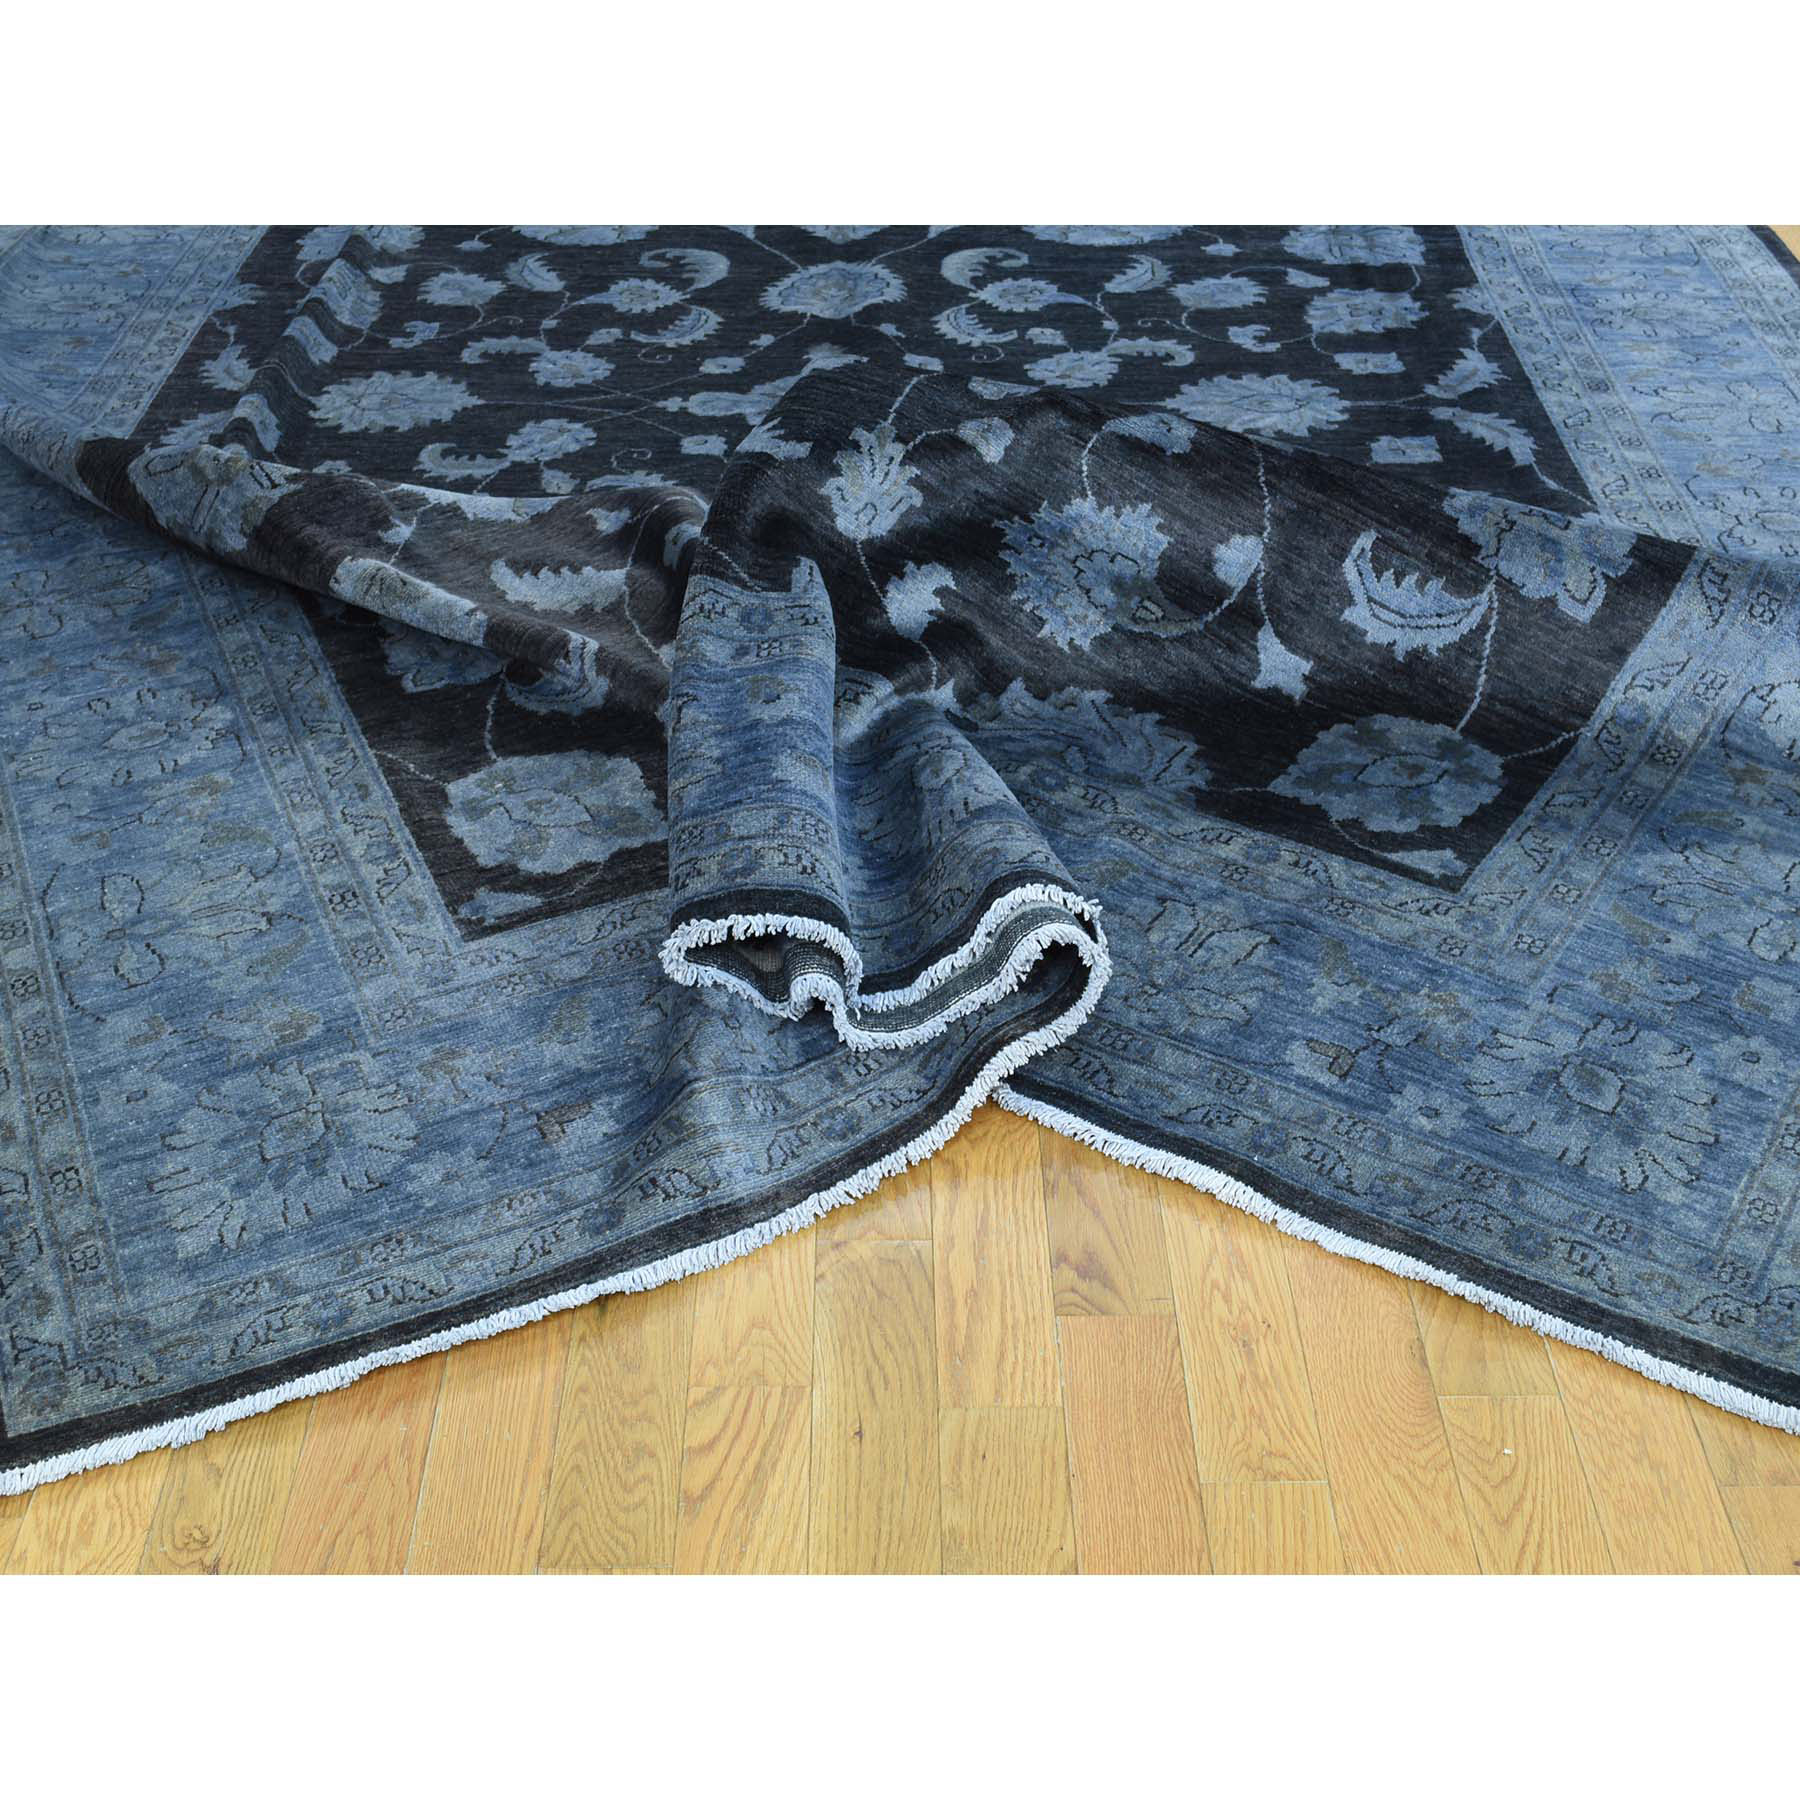 9-x12- Hand-Knotted Black Overdyed Peshawar Pure Wool Oriental Rug 